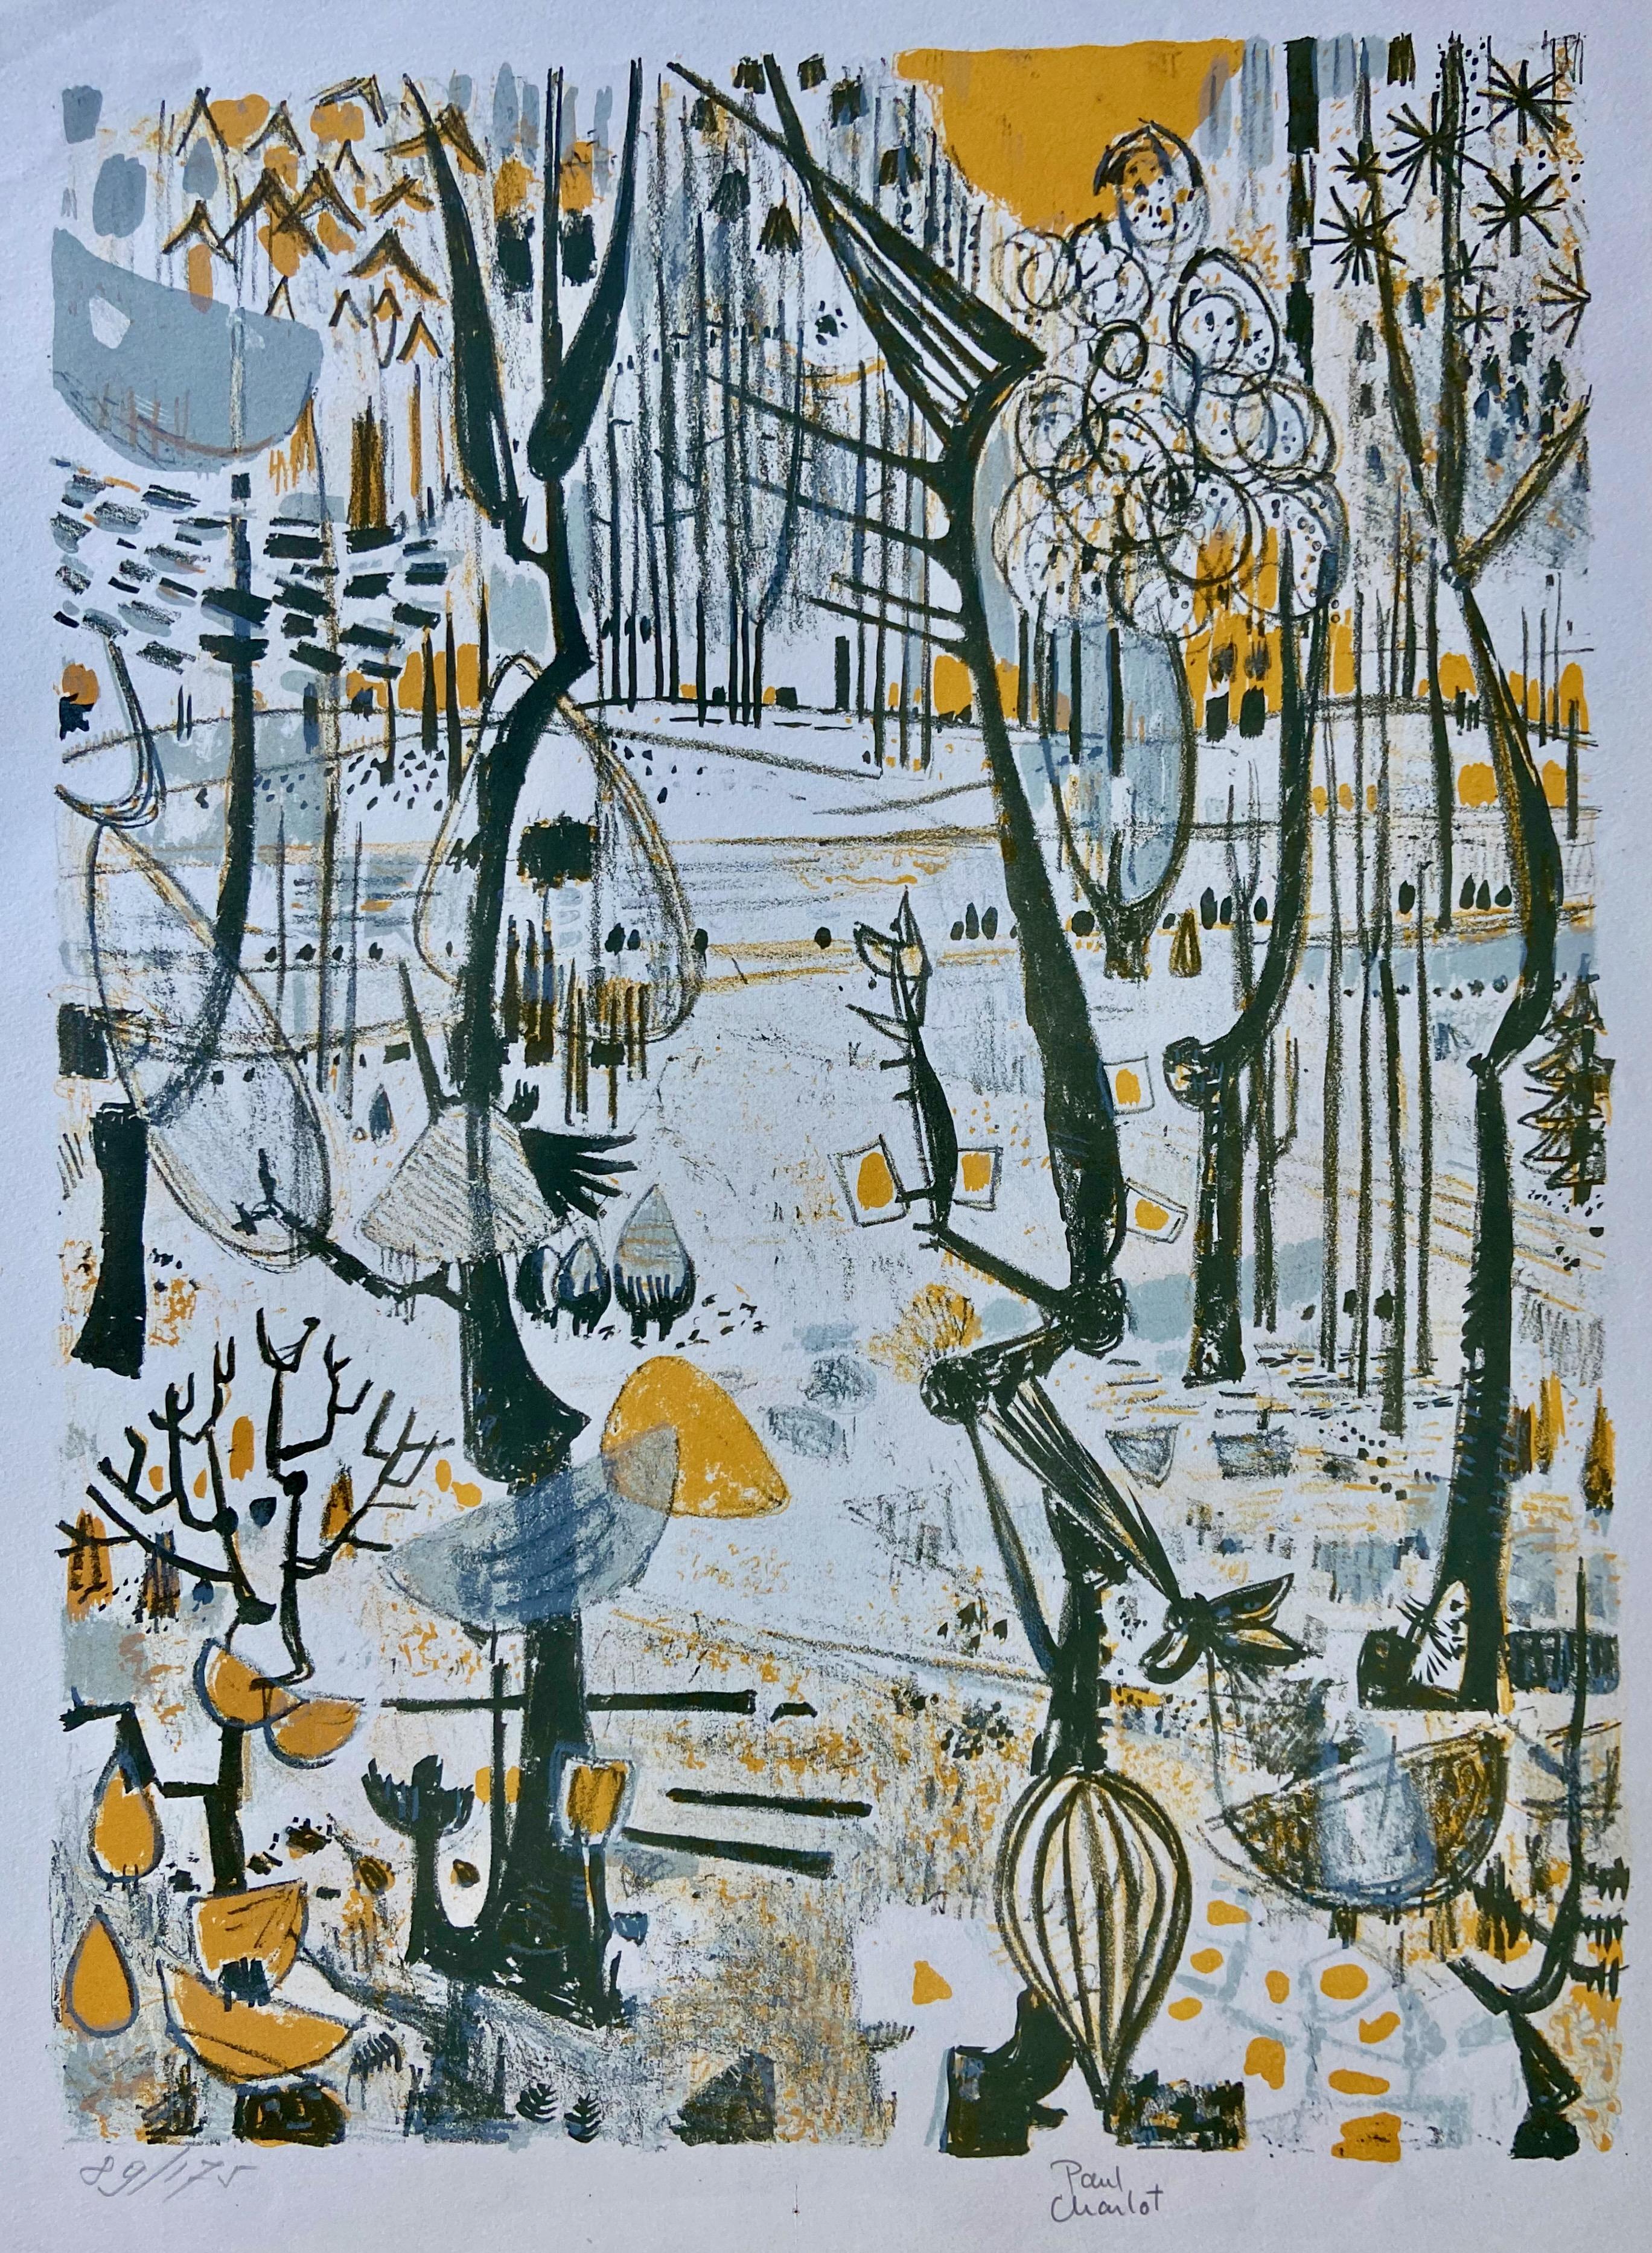 Whimsically rendered forest scene, original lithograph